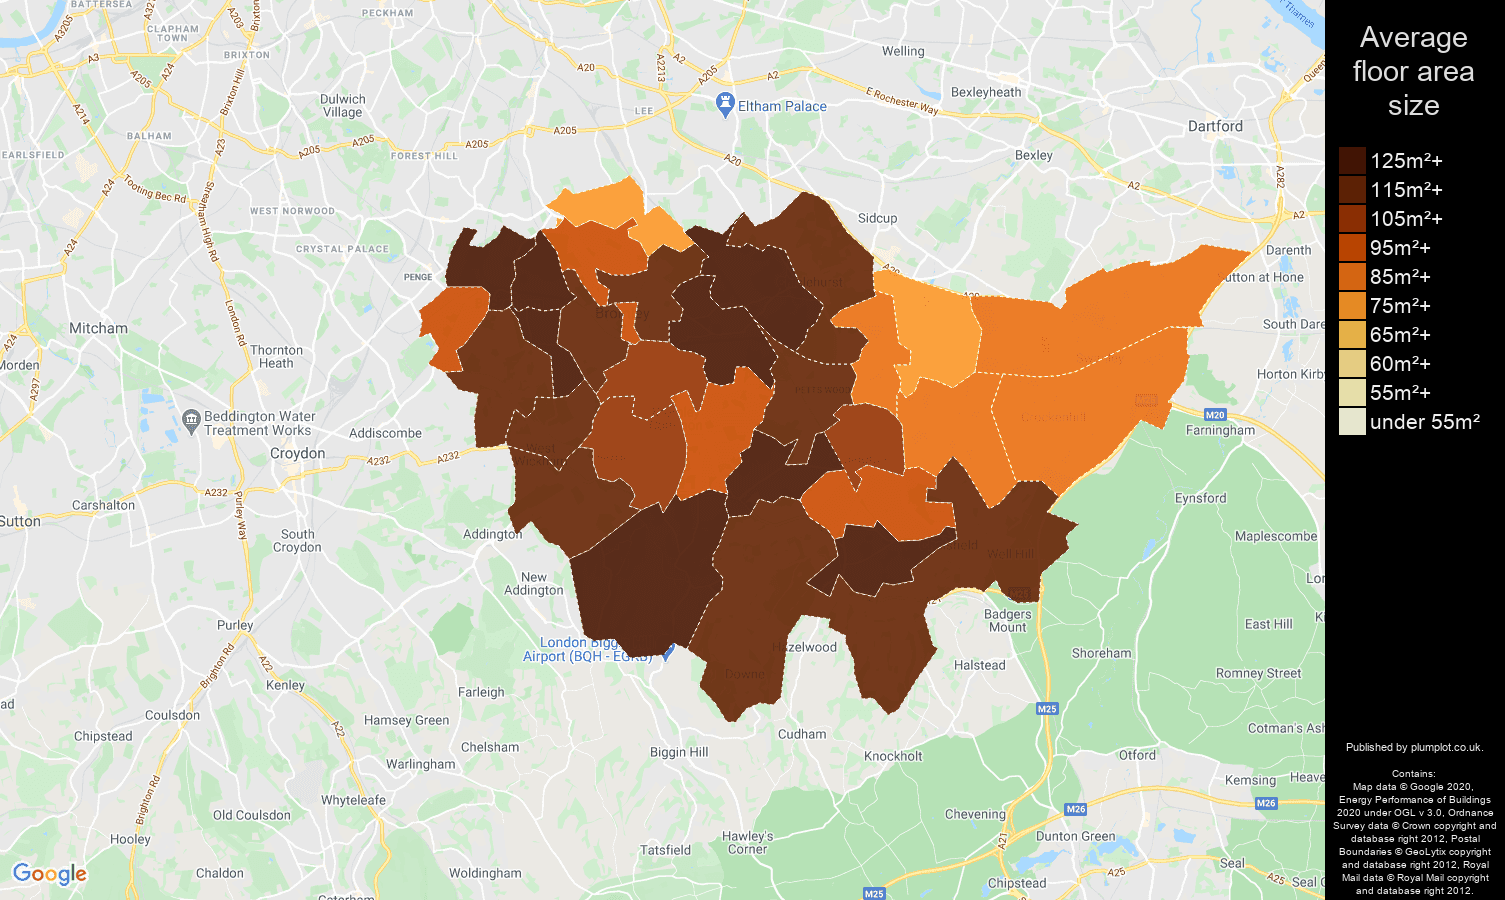 Bromley map of average floor area size of houses